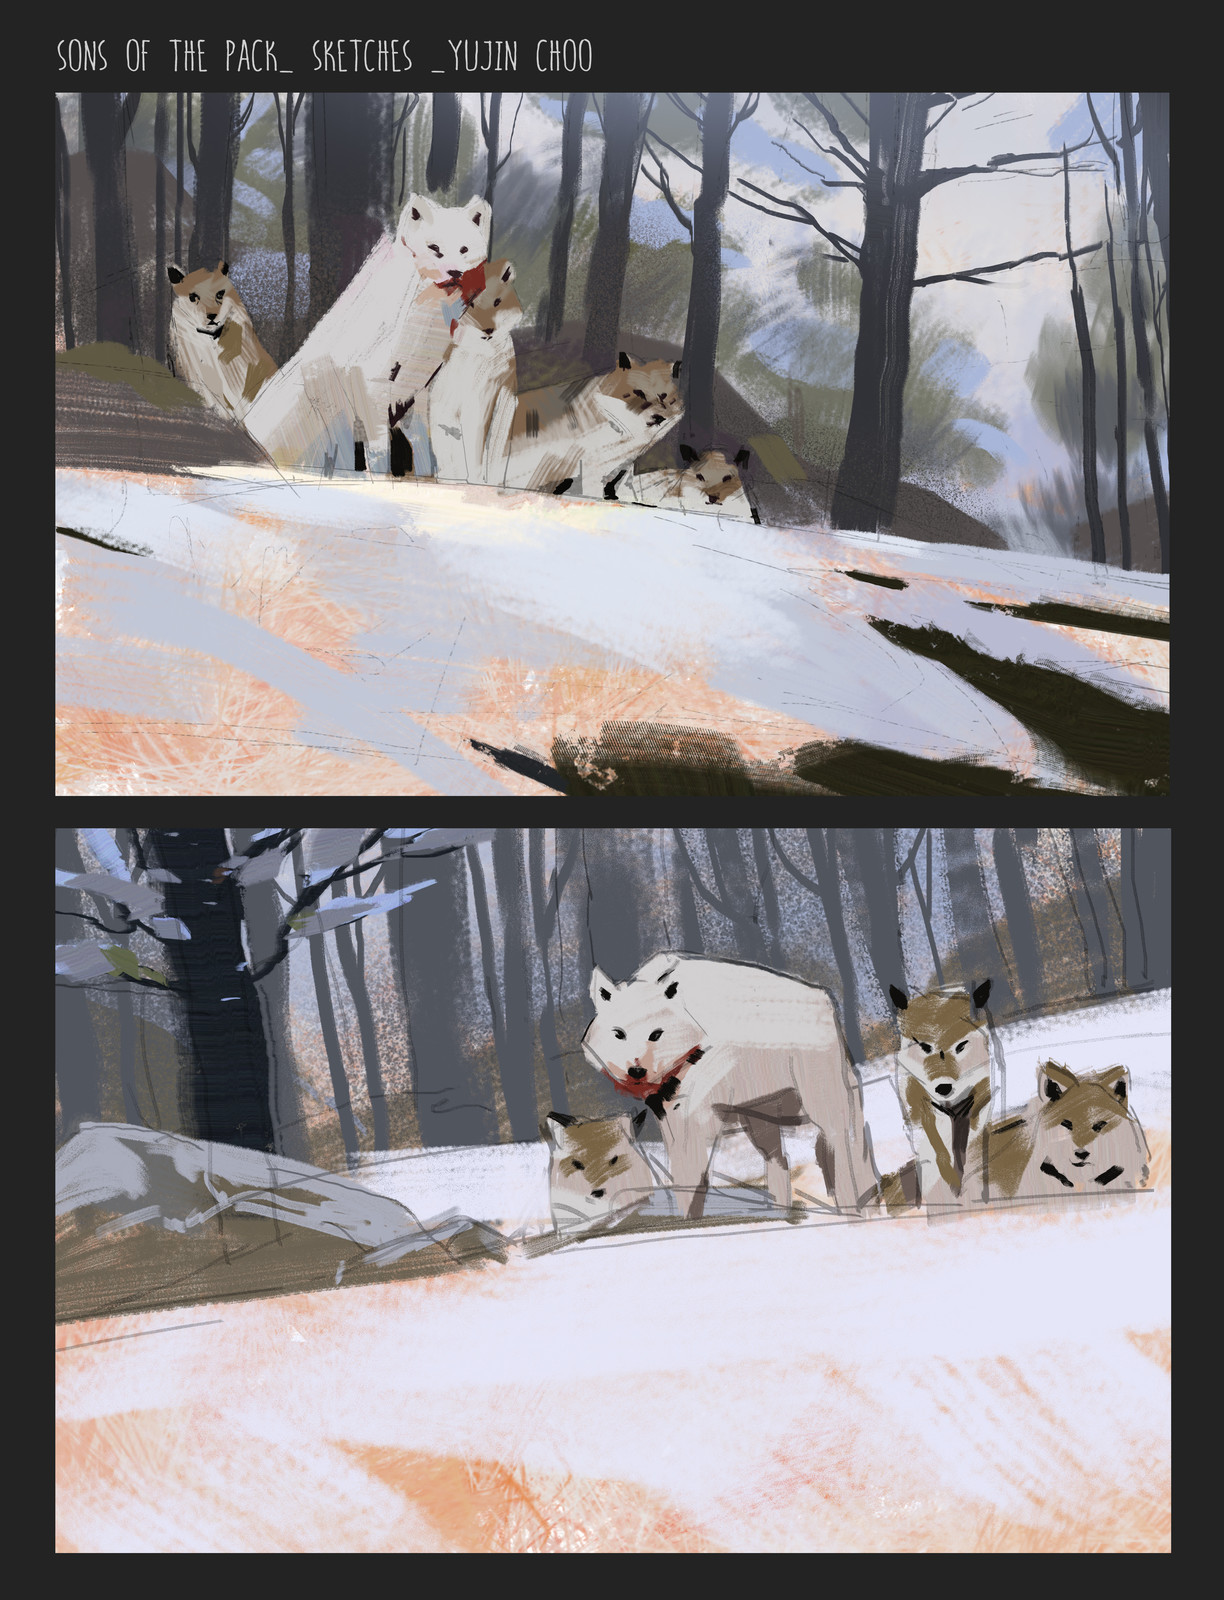 sketches for "Sons of the Pack"